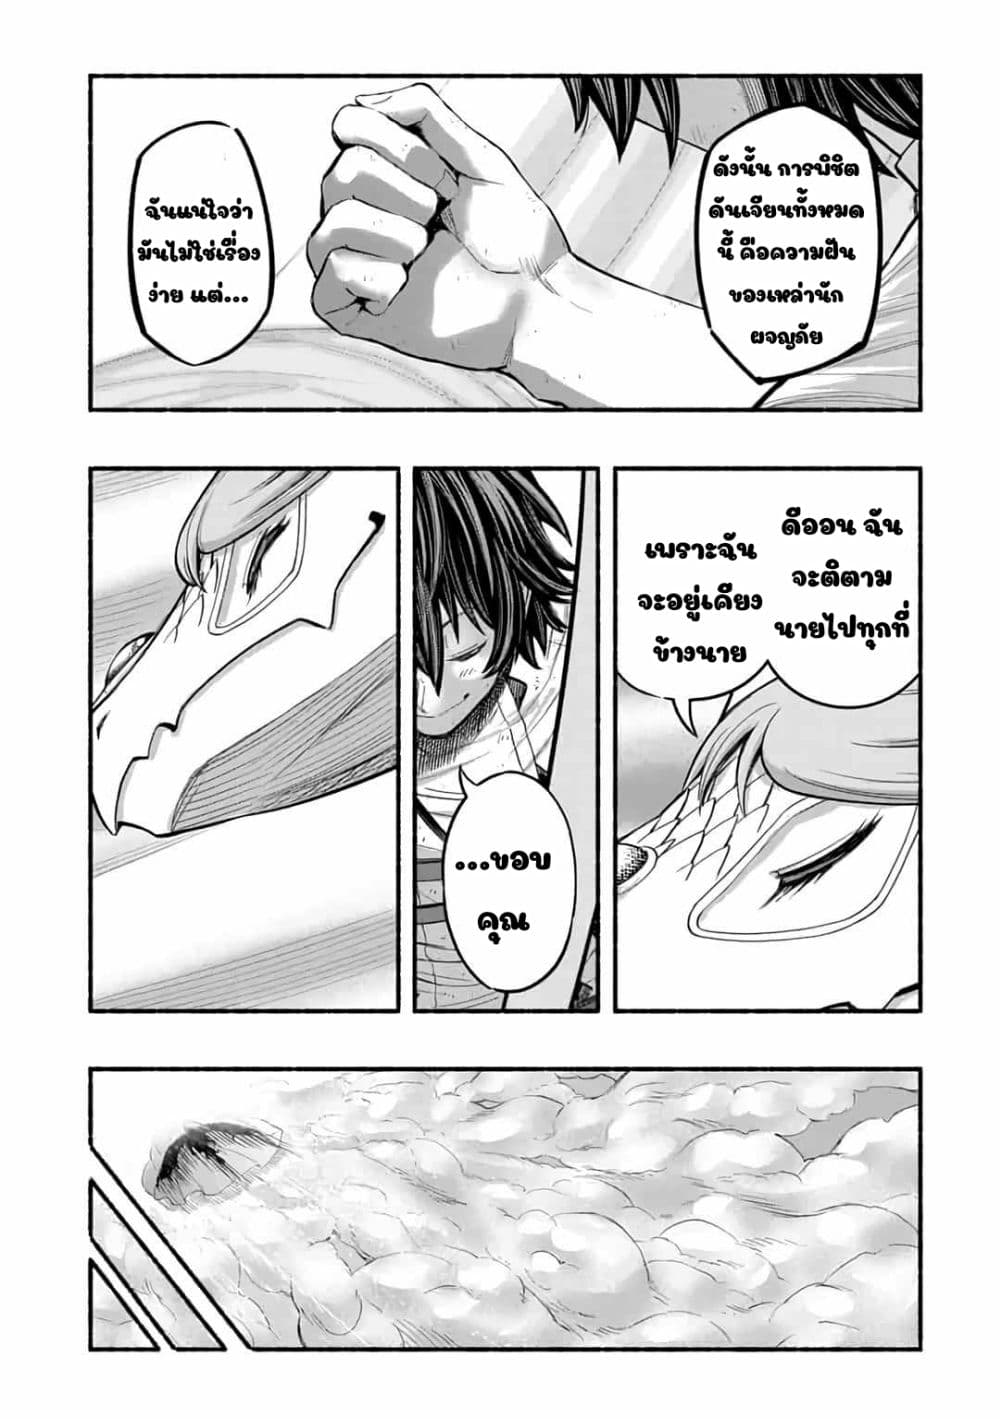 A Story About a Dragon 5.2 04